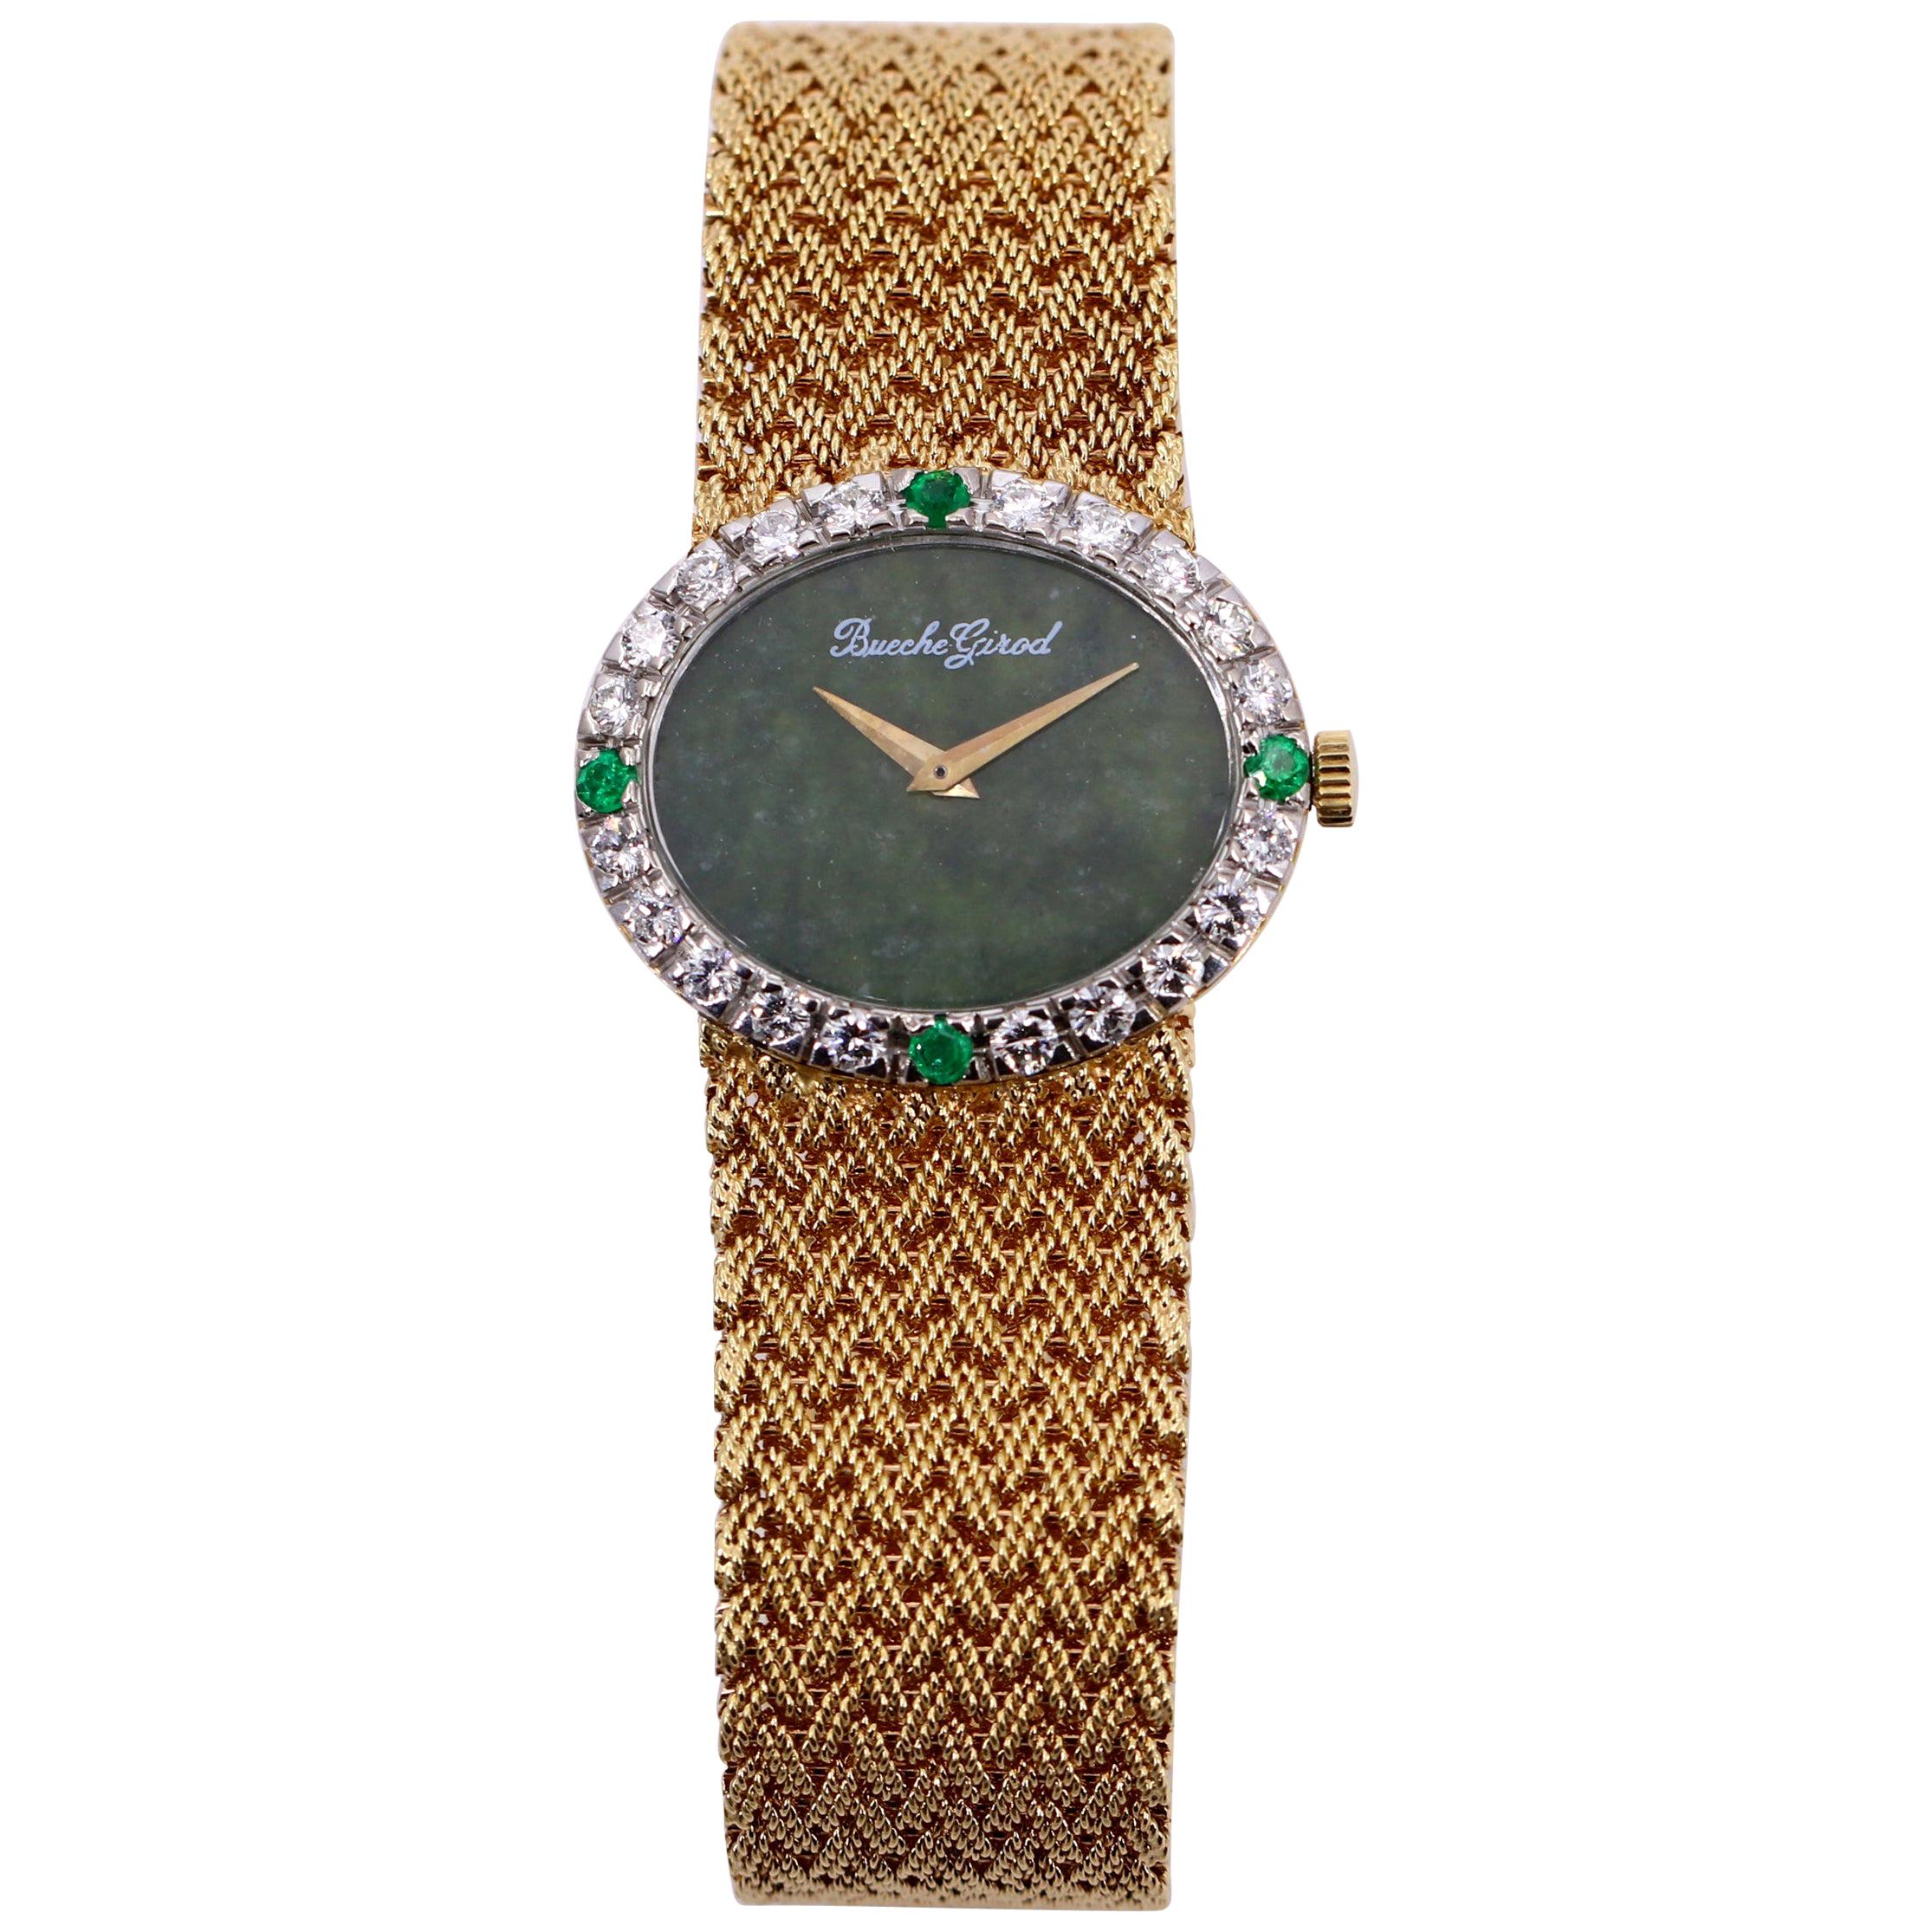 Ladies Gold Beuche Girod Watch with Diamond and Emerald Bezel and Jade Dial